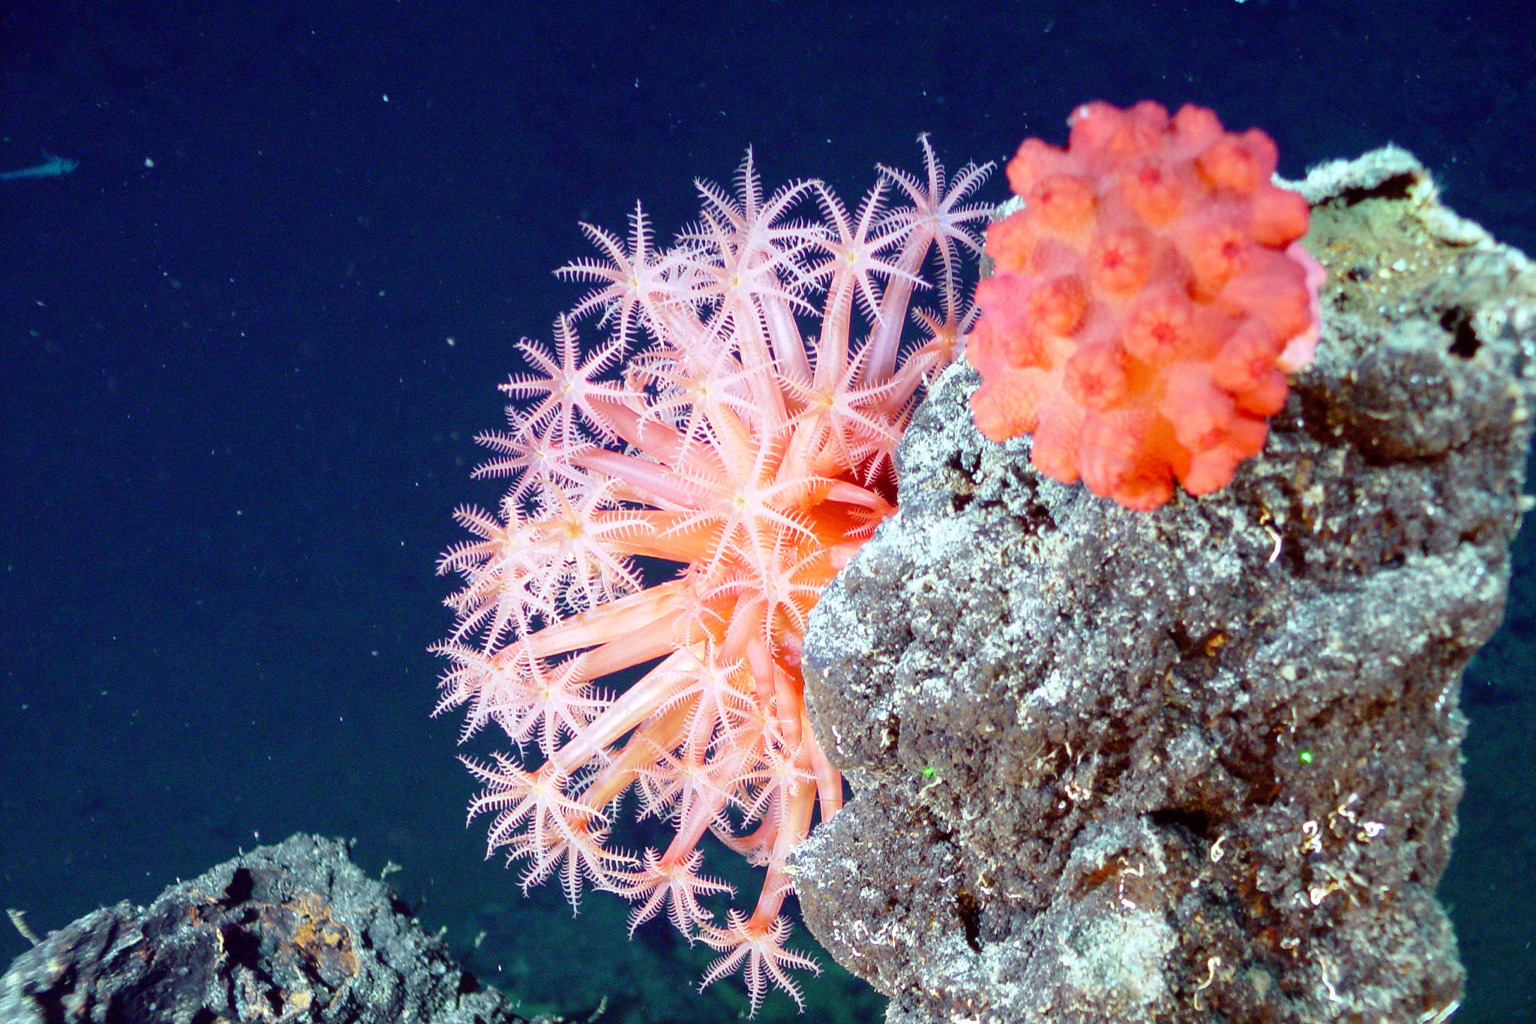 Cold water corals in the deep sea. The interrelationships between plant and animal species are very complex, and can impact carbon storage in varied ways. Image by Submarine Ring of Fire 2002, NOAA/OER via Flickr (CC BY-SA 2.0).